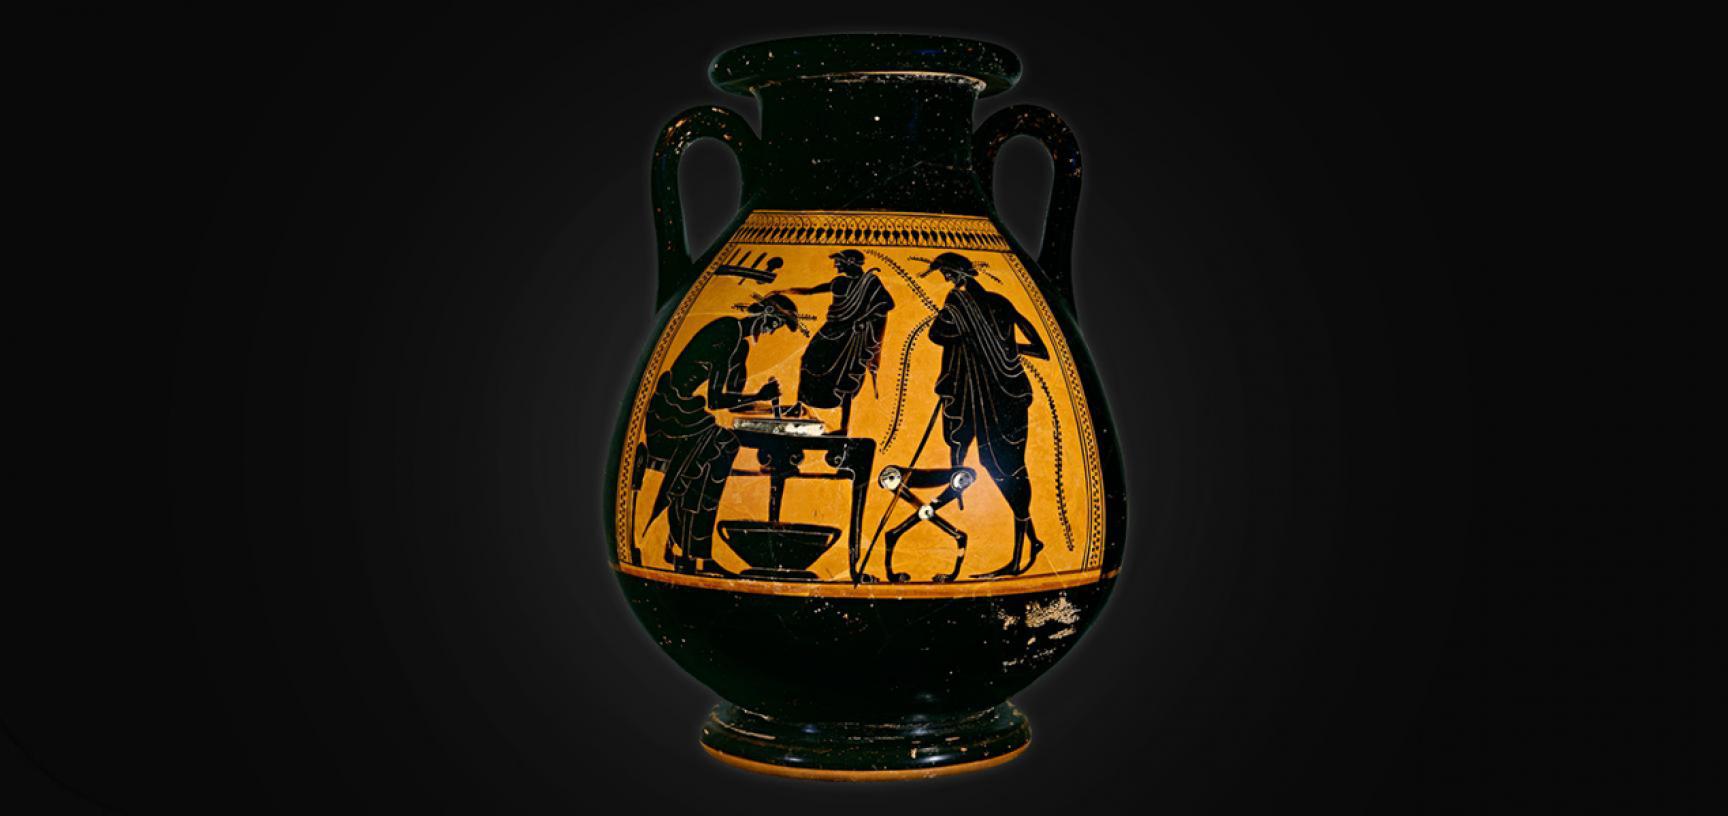 SHOEMAKER VASE from the Ashmolean collections